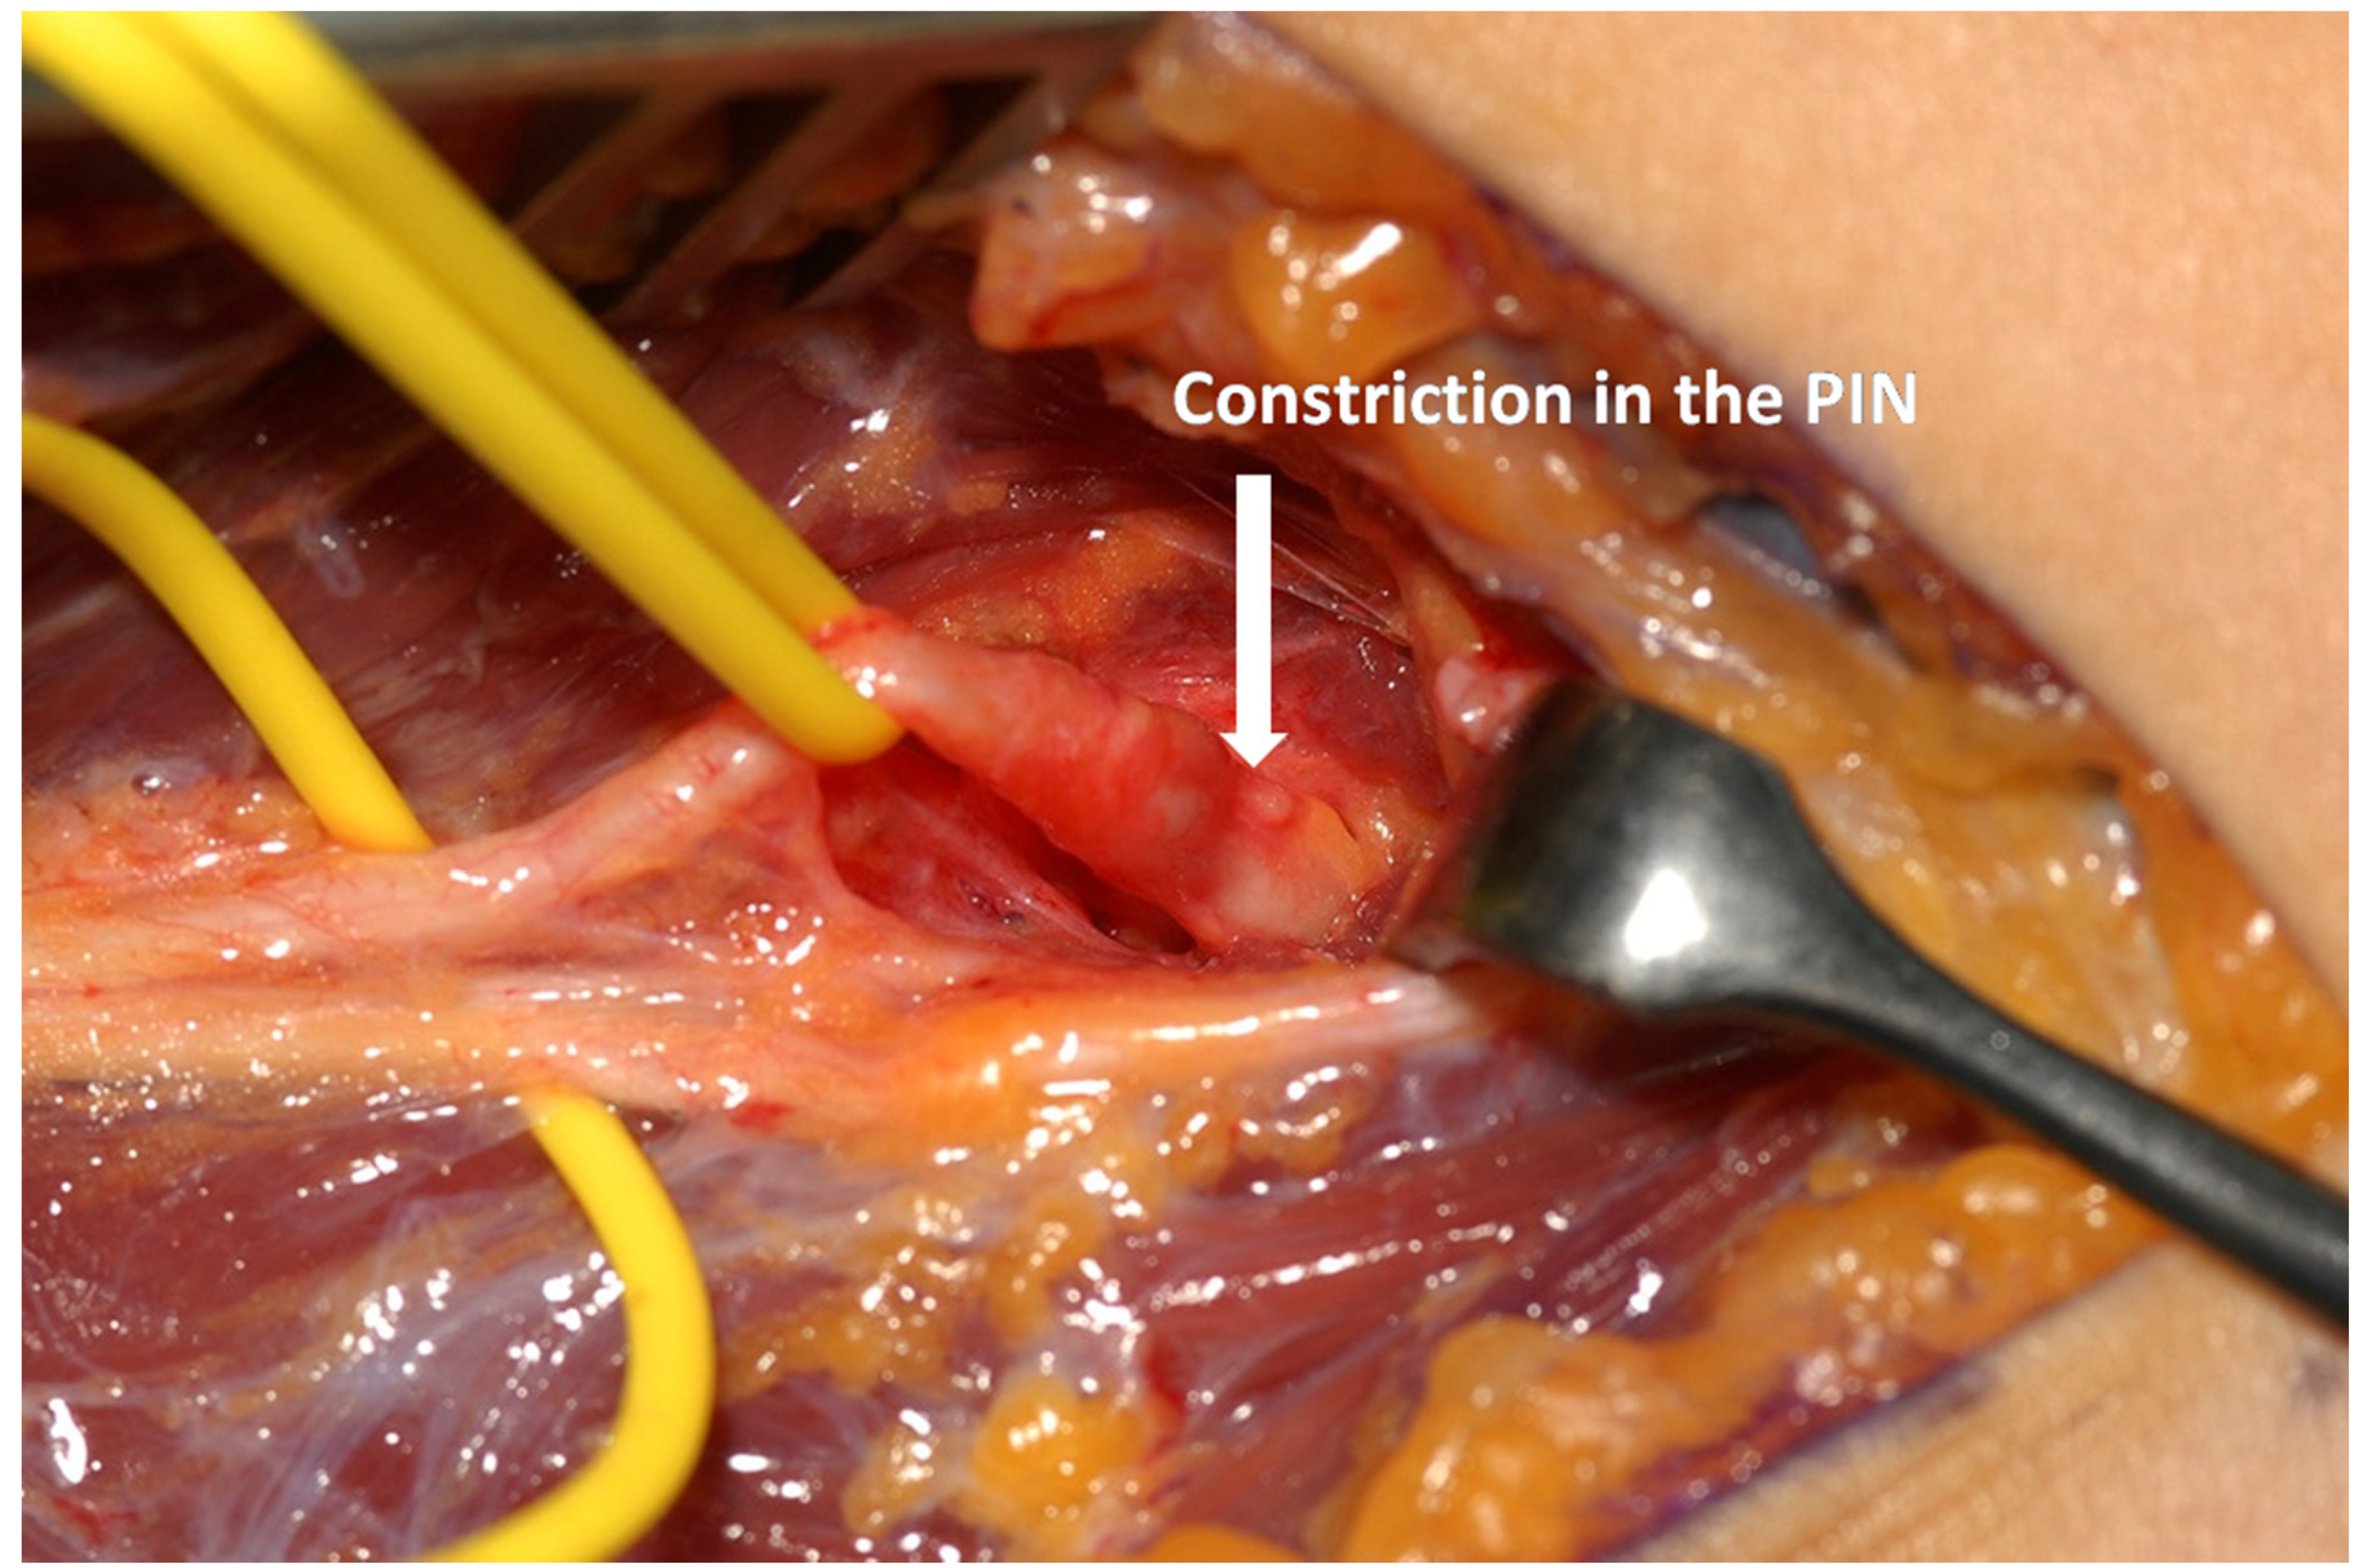 Figure 3b: Exploration of the posterior interosseous nerve (PIN) in a patient PIN syndrome. After tracing the PIN into supinator a constriction was found which required decompression. (Photographs provided by Tim Hems, Queen Elizabeth University Hospital, Glasgow, UK.)